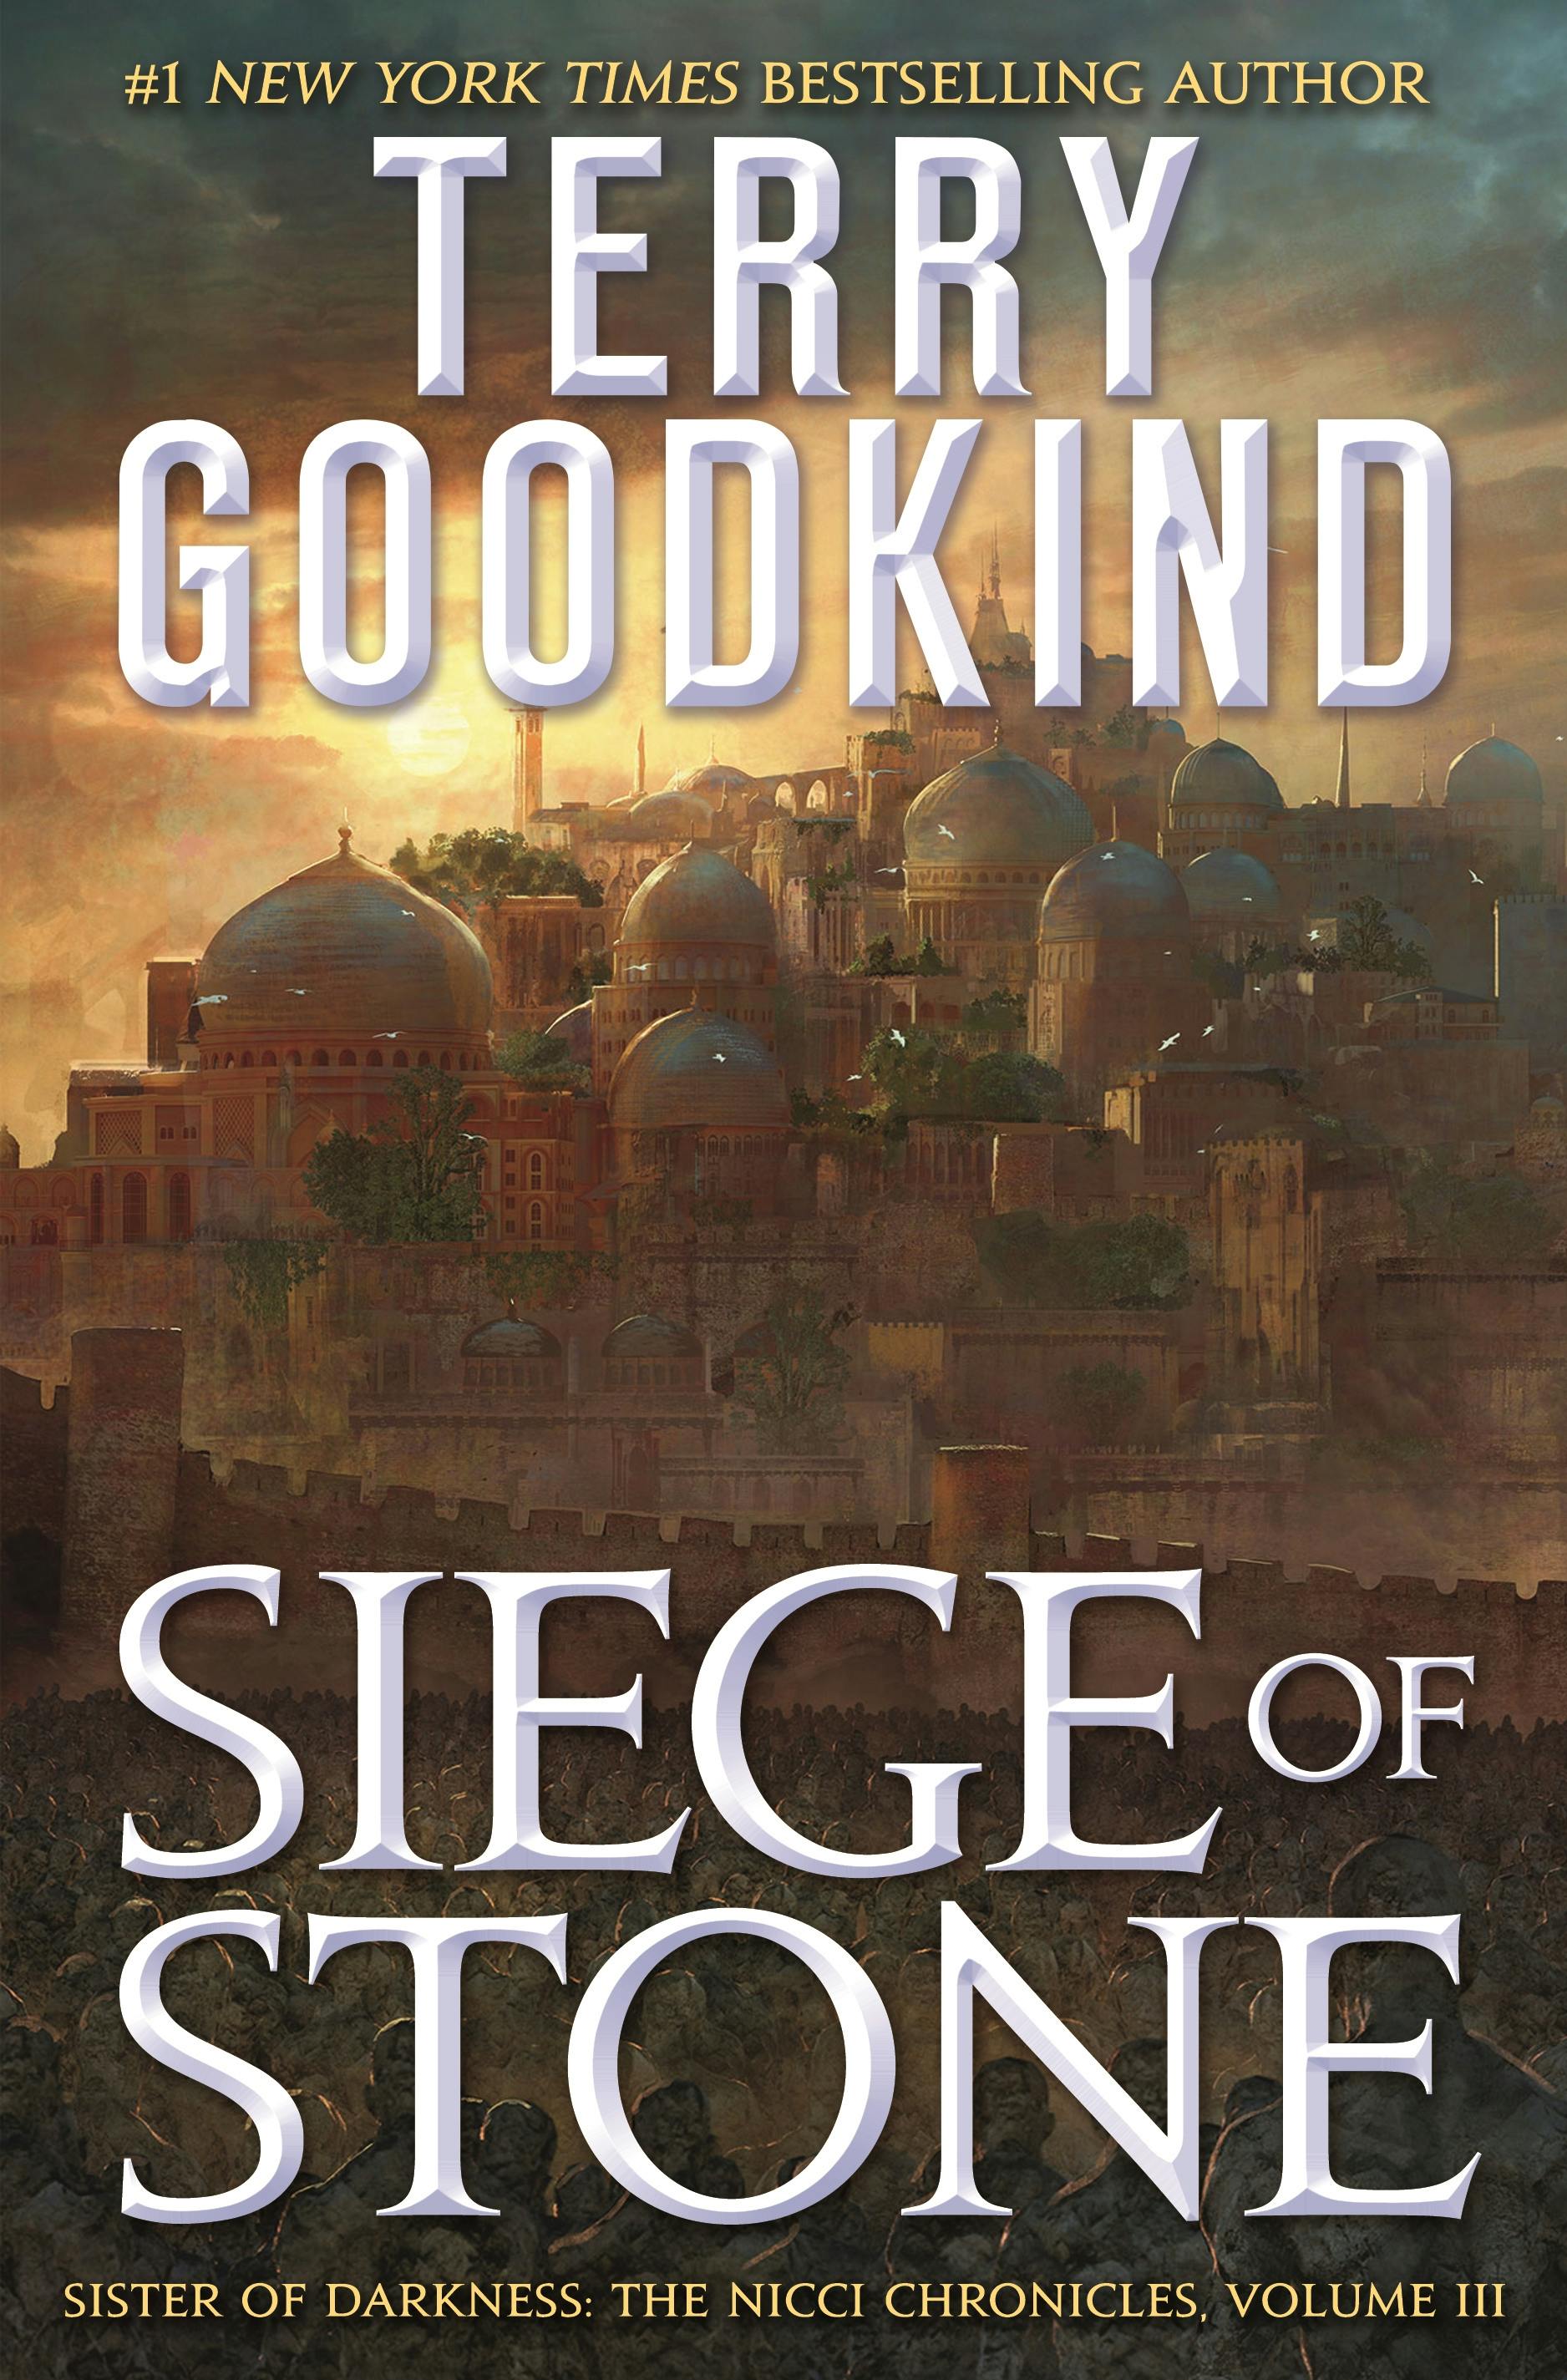 Cover for the book titled as: Siege of Stone